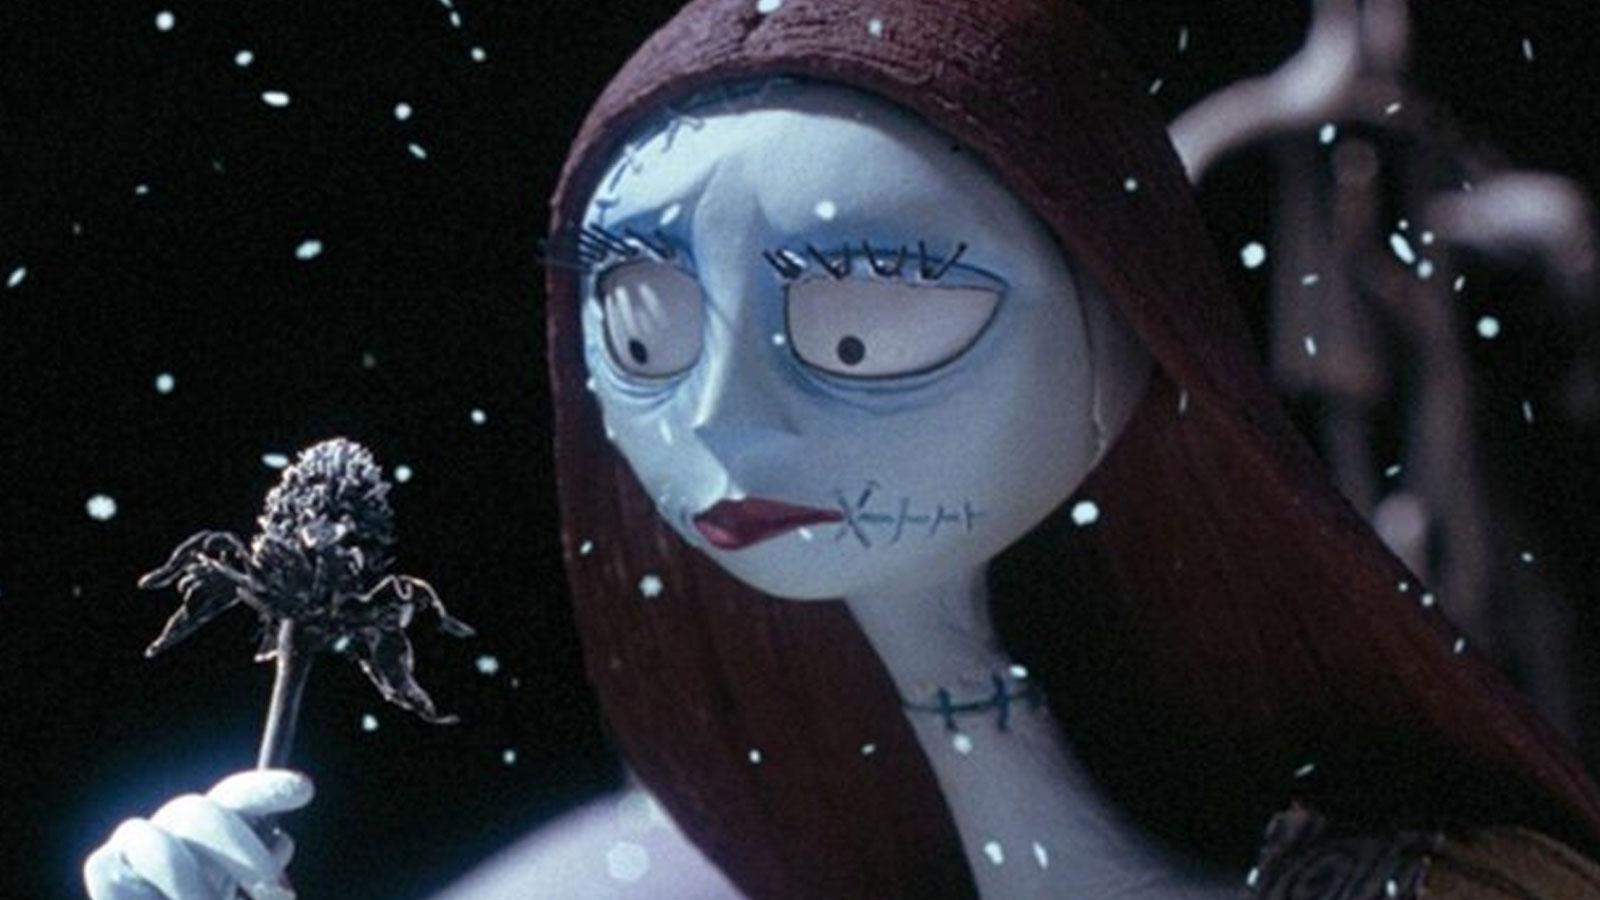 Scene from the film The Nightmare Before Christmas